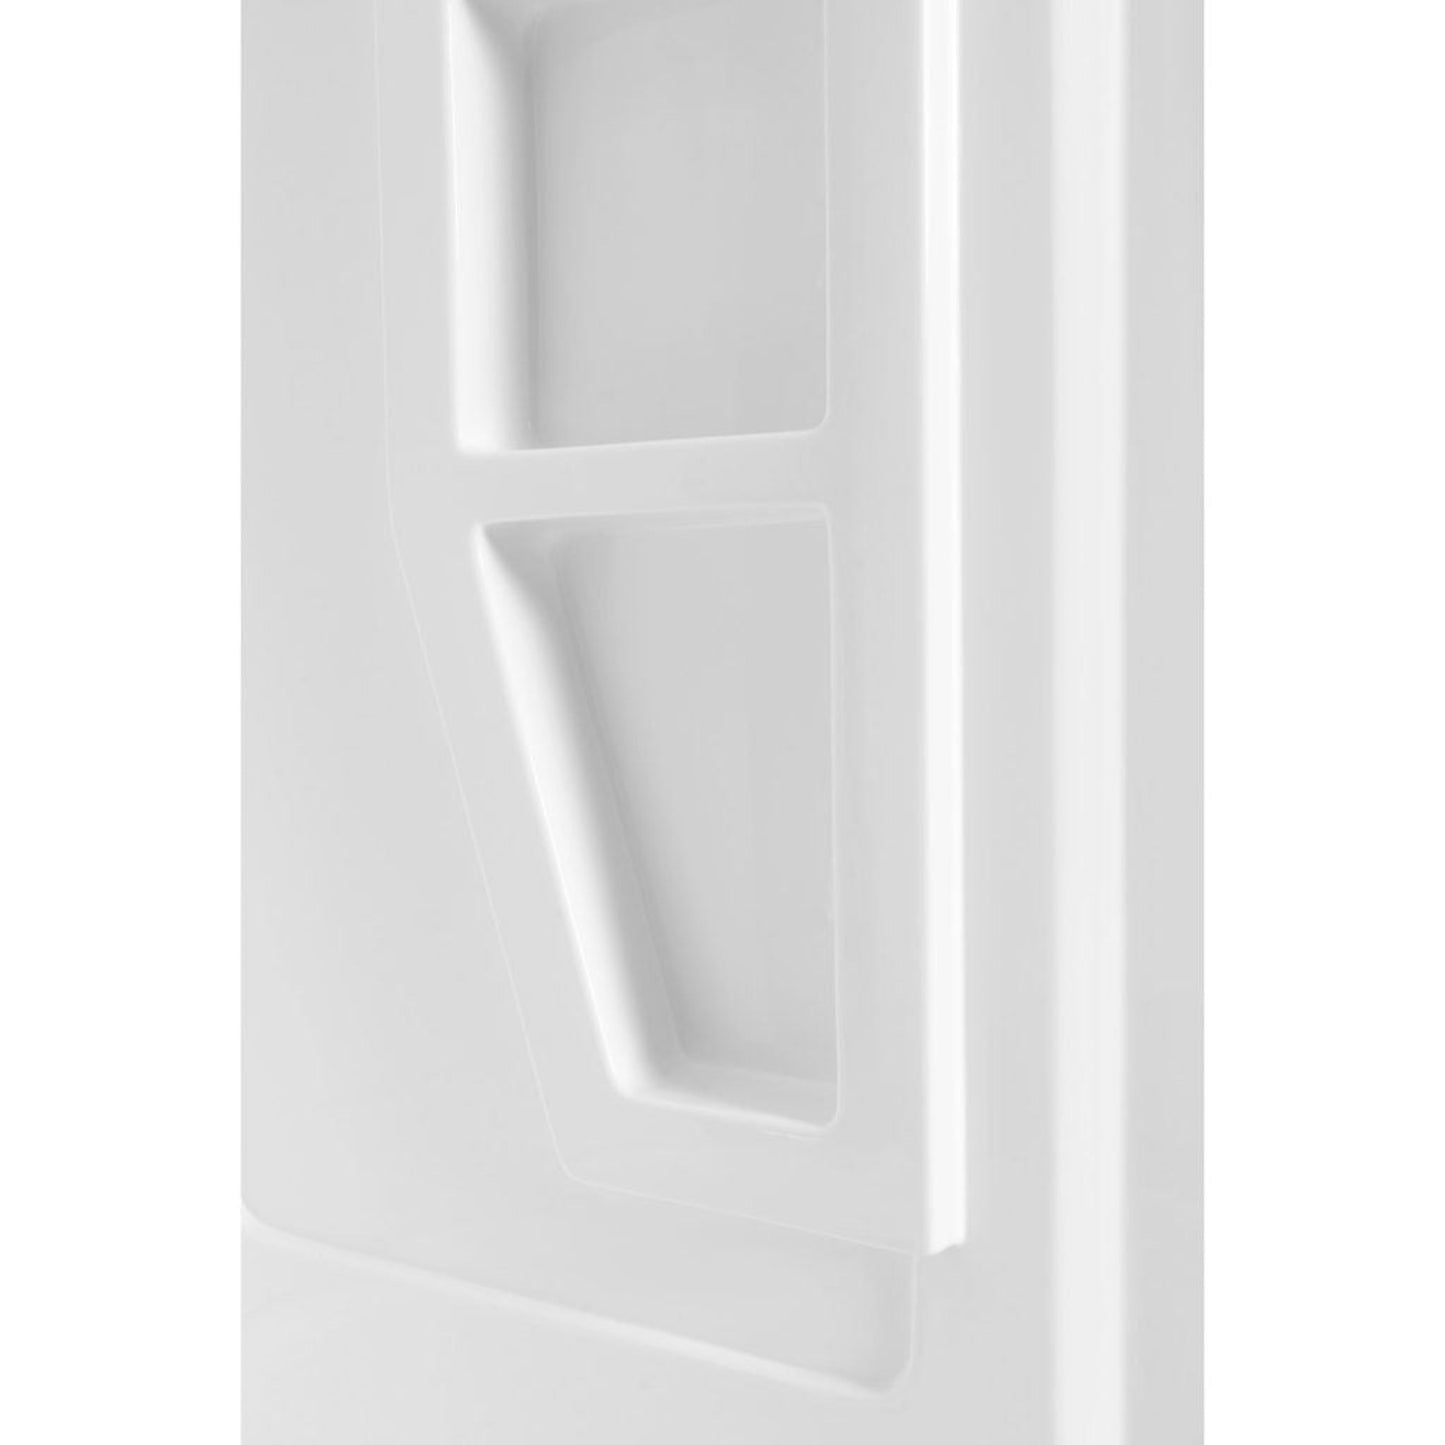 ANZZI Sharman Series 36" x 36" x 74" White Acrylic Corner Two Piece Shower Wall System With 4 Built-in Shelves